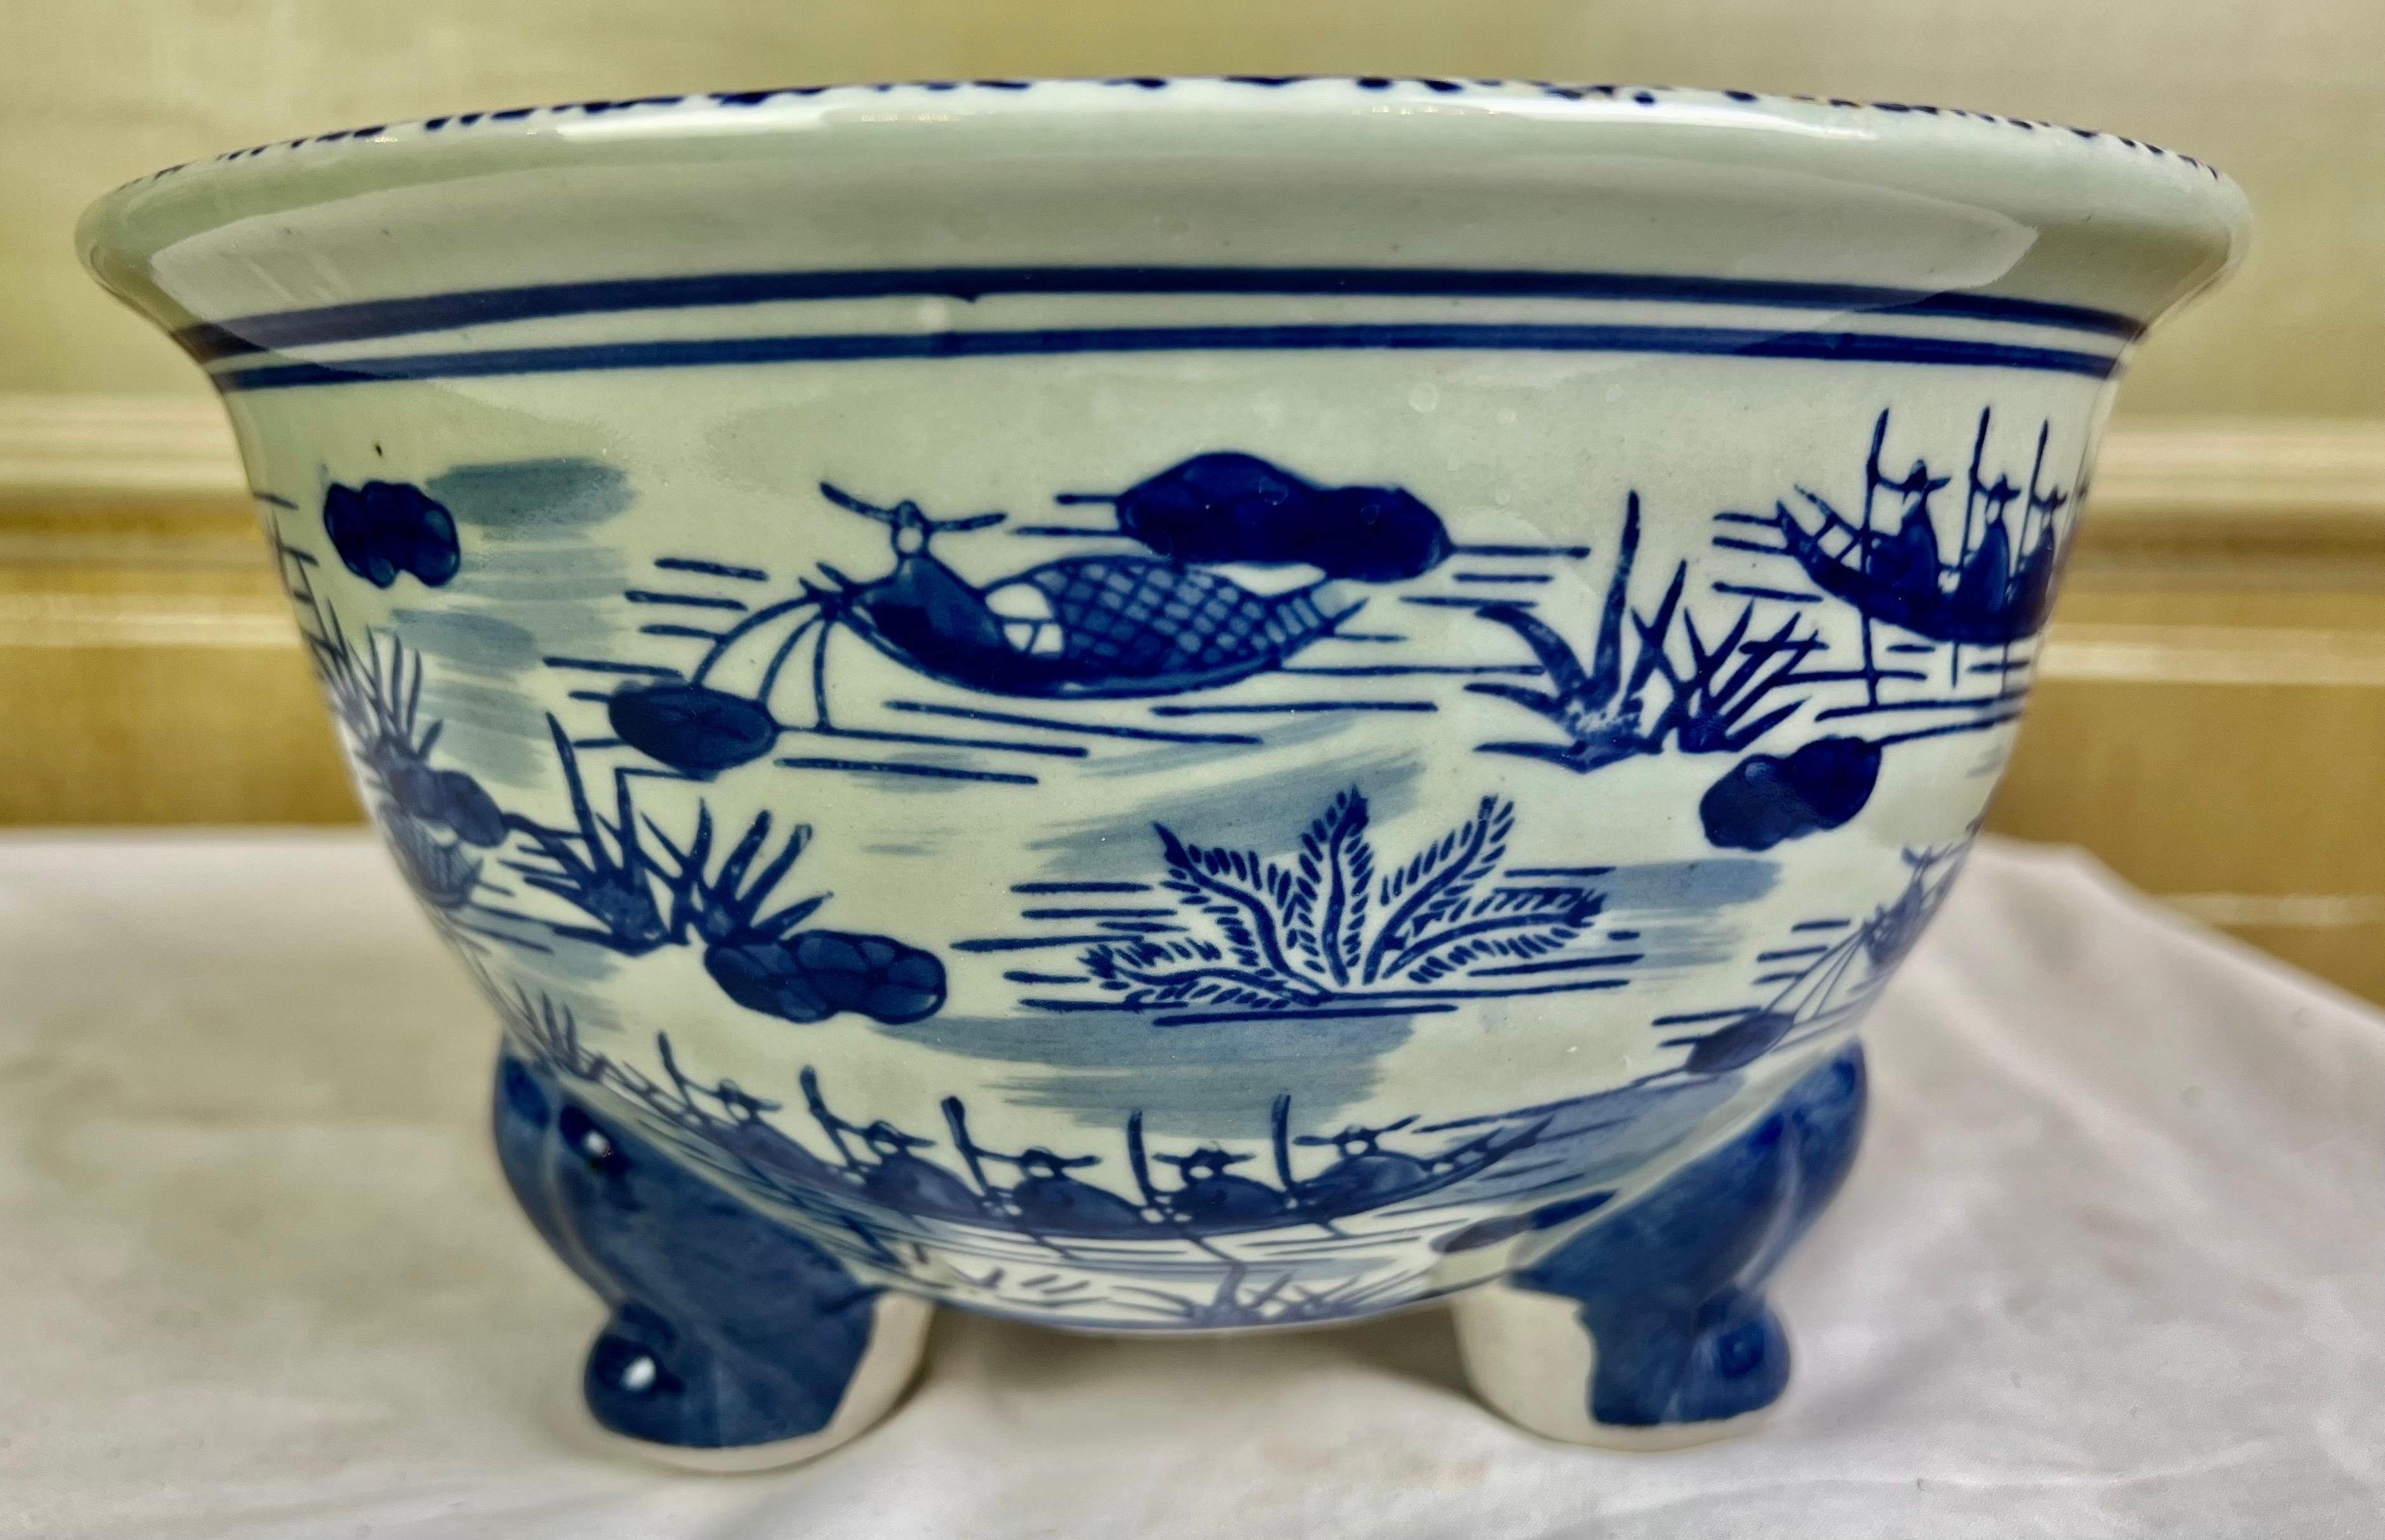 Charming blue & white Chinese export porcelain orchid pot.